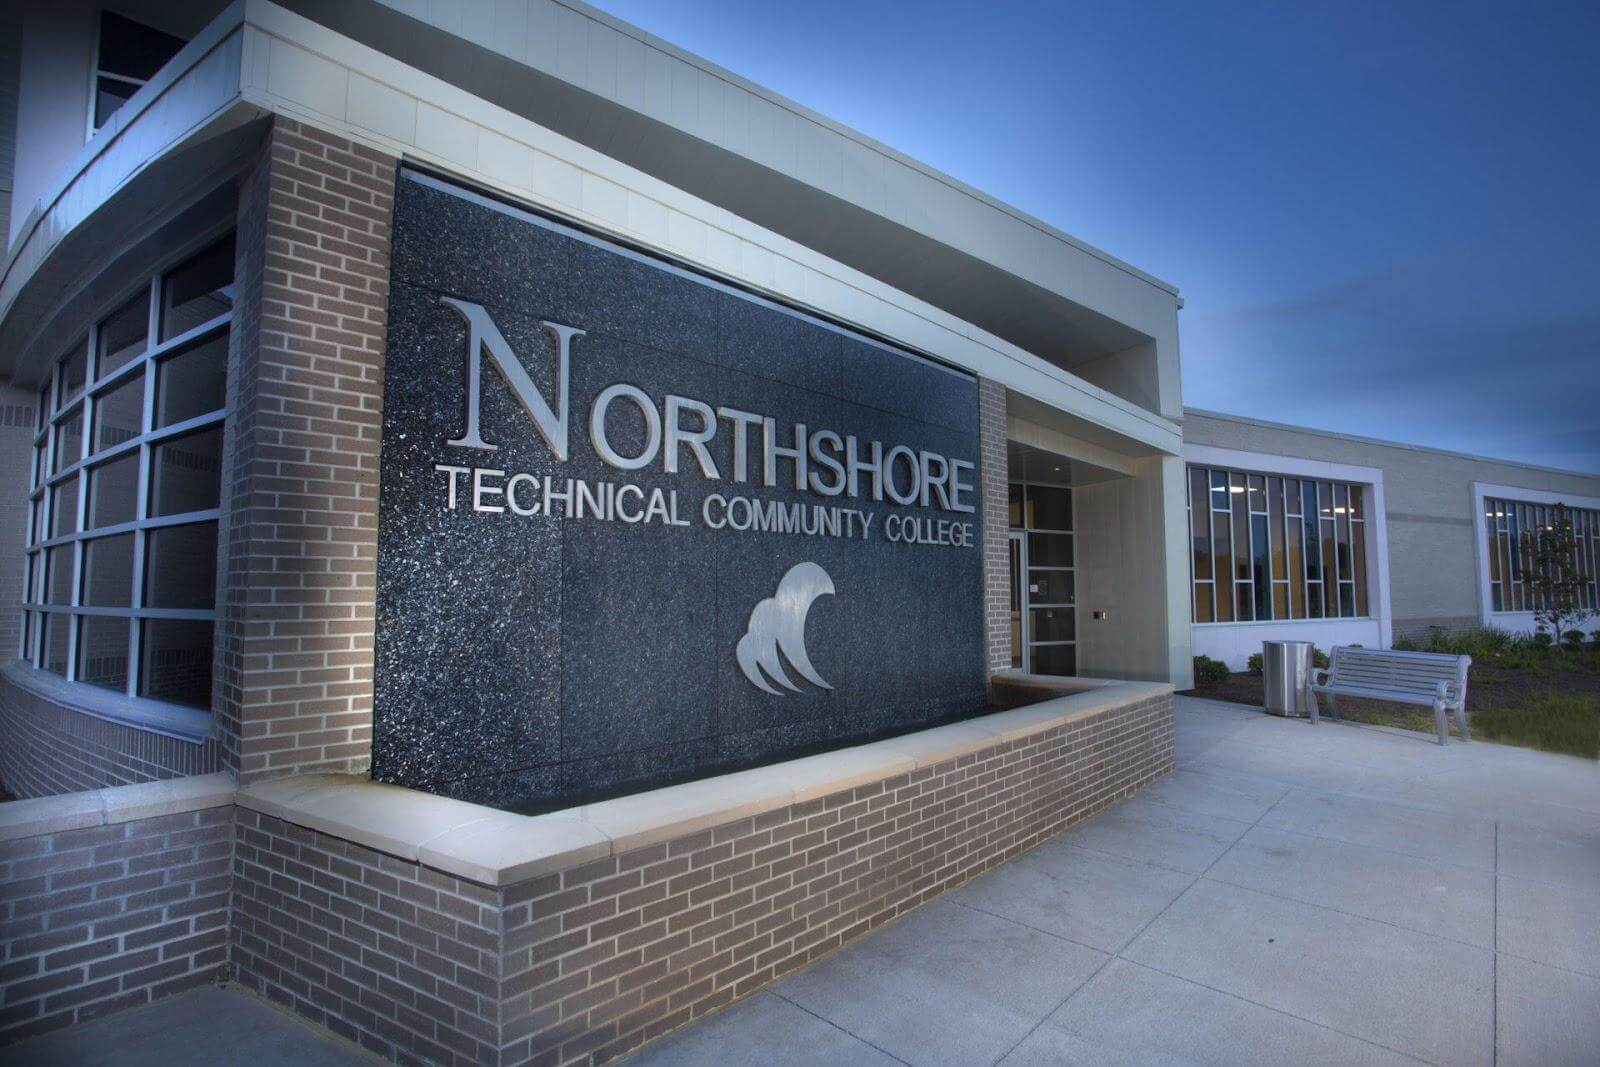 Two Northshore Technical Community College (NTCC) logo on the building.